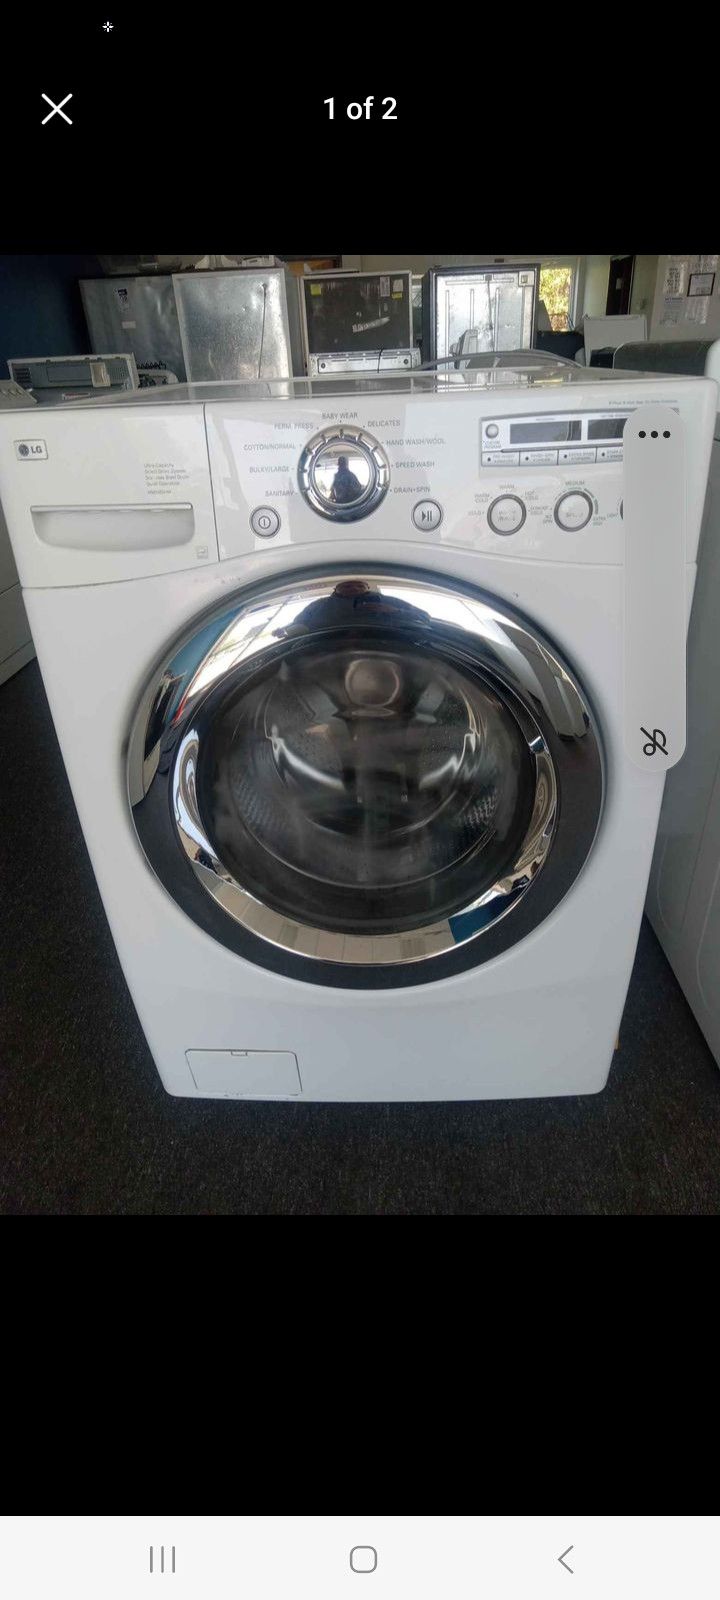 Front load washer and electric dryer set with warranty 